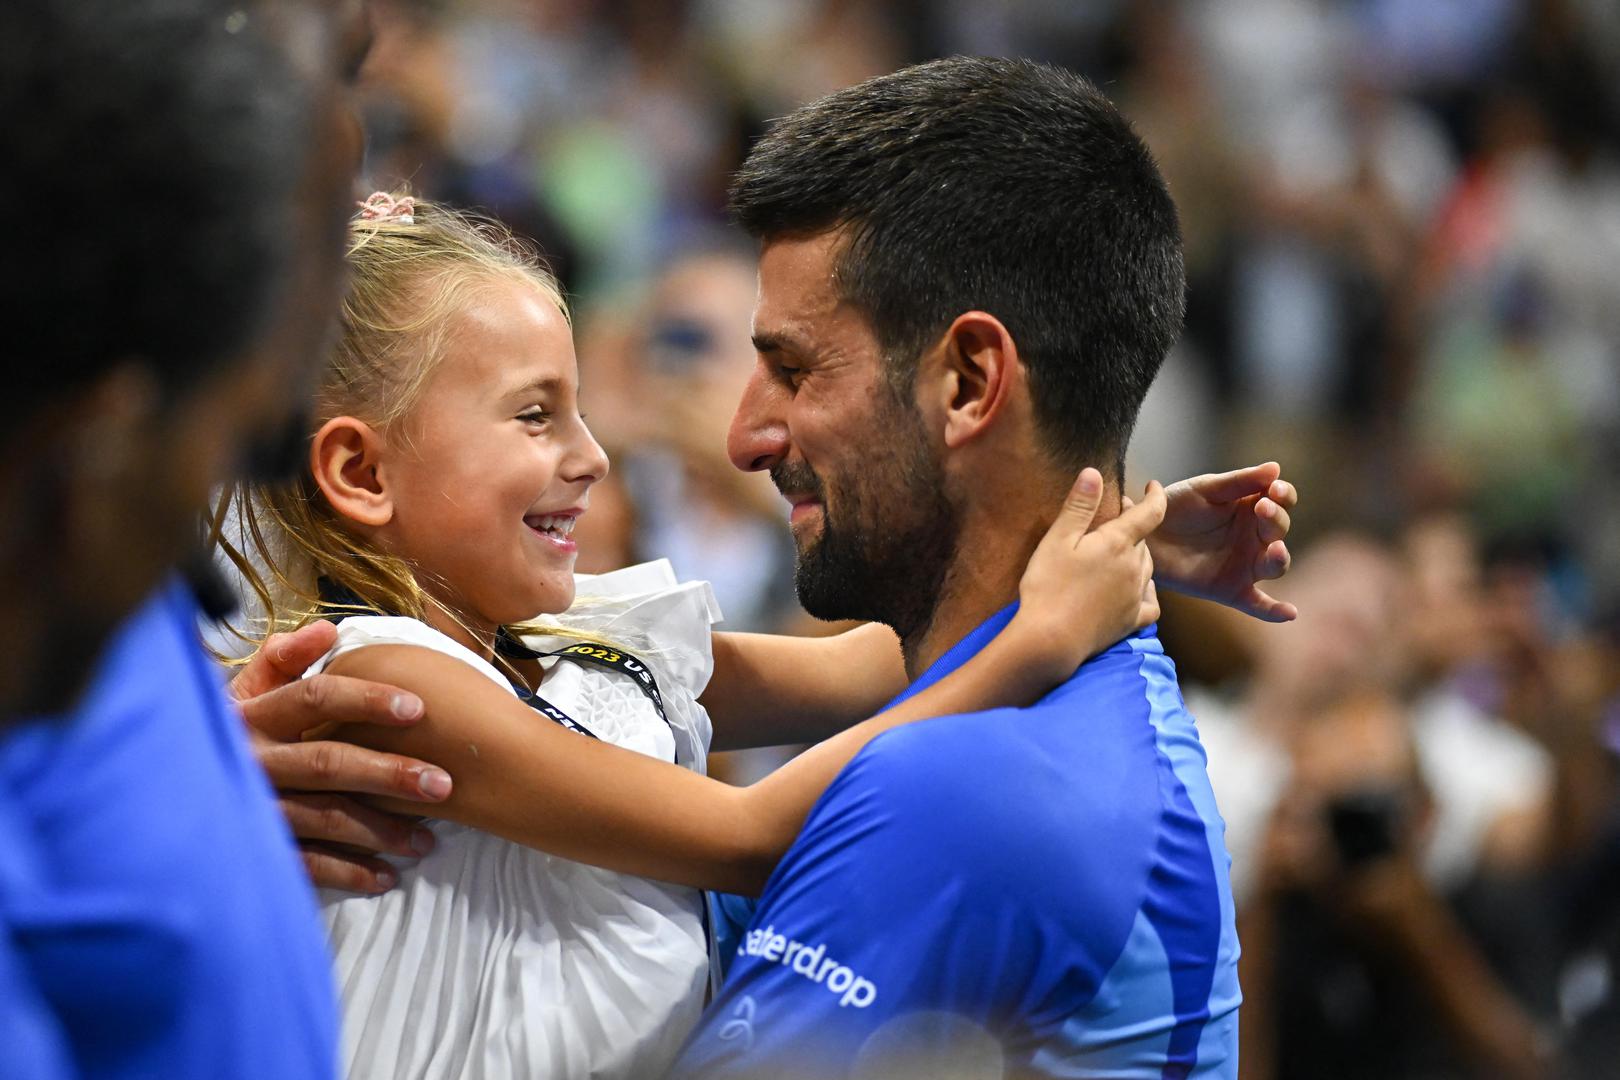 Novak Djokovic (SRB) wins his 24th Grans Slam at the 2023 US Open at Billie Jean National Tennis Center in New York City, NY, USA, on September 10, 2023. Photo by Corinne Dubreuil/ABACAPRESS.COM Photo: Dubreuil Corinne/ABACA/ABACA